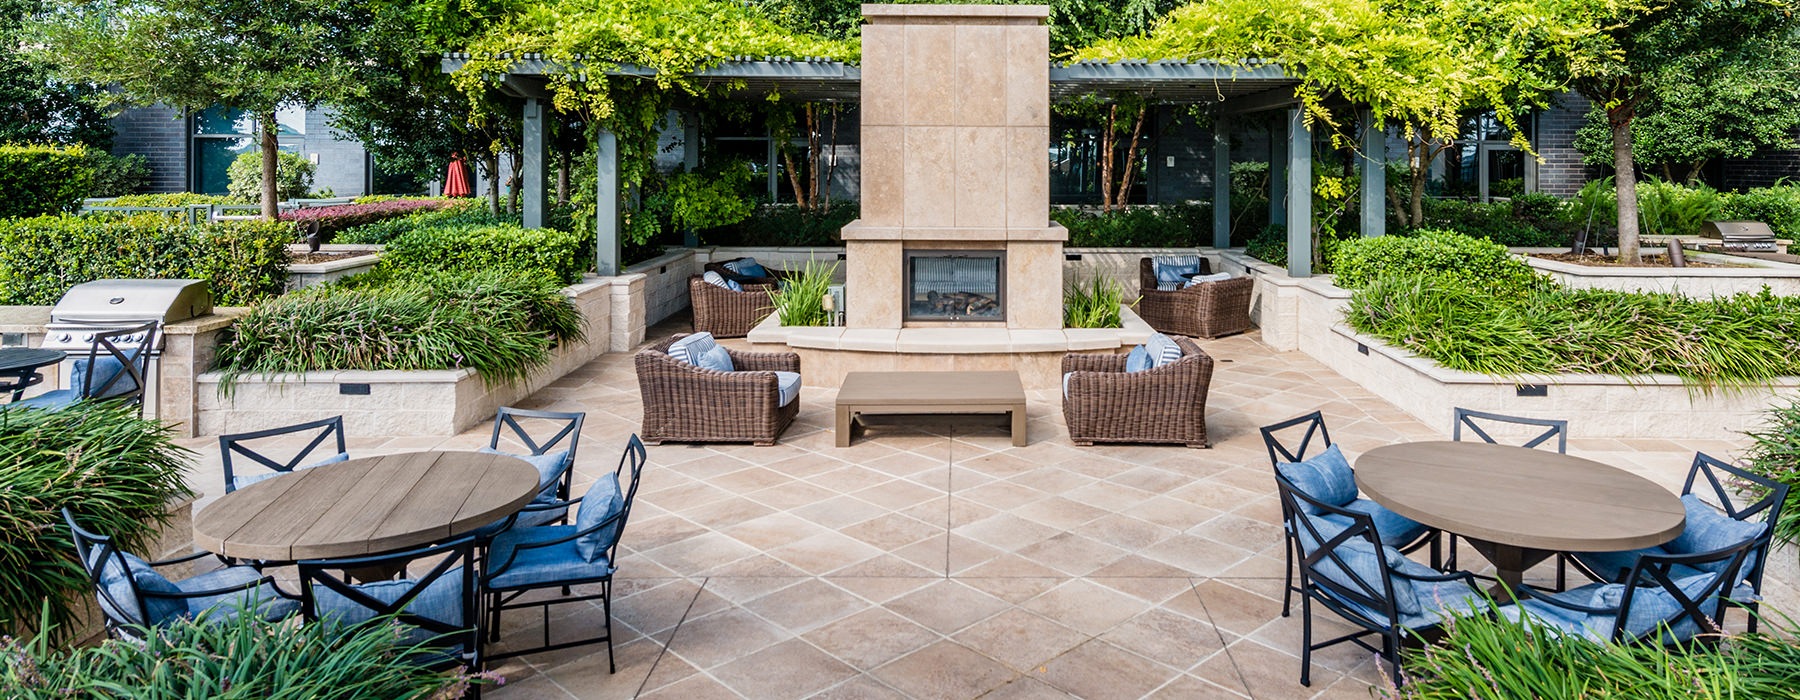 Large outdoor fireplace surrounded by the pool and plenty of seating 